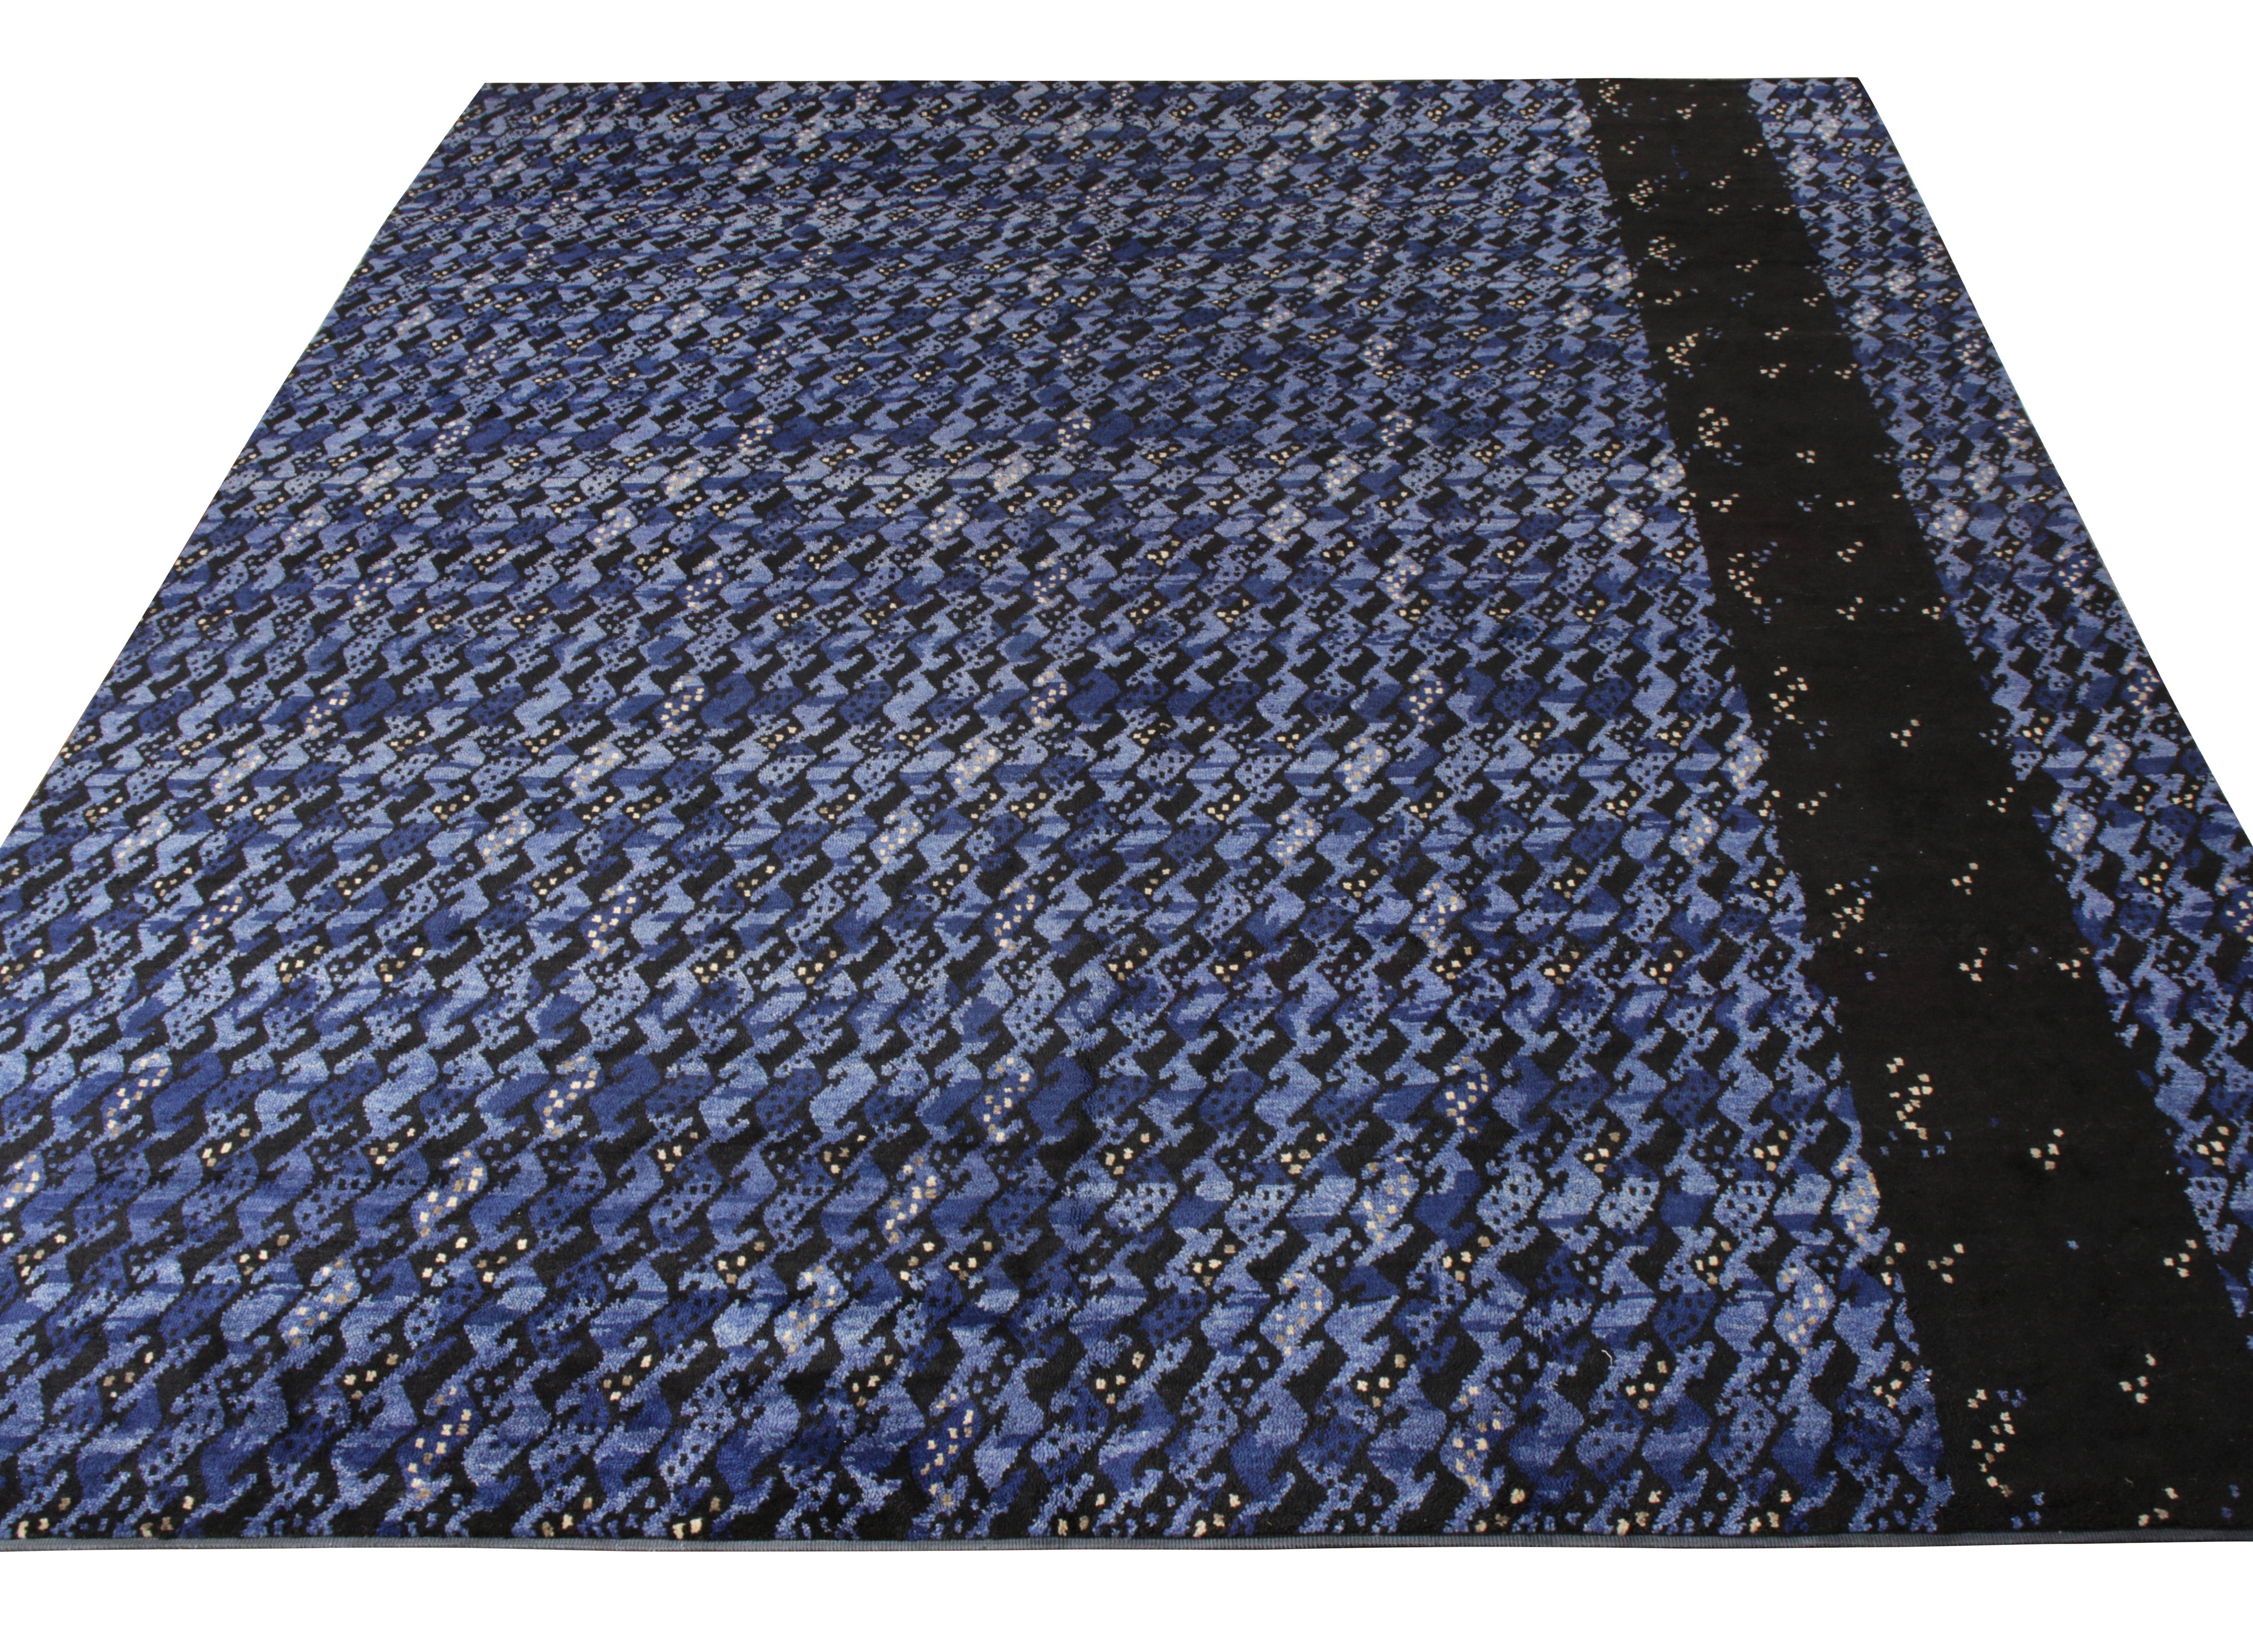 Hailing from Rug & Kilim’s Scandinavian pile collection, a 10x14 rug boasting a refined geometric pattern prevailing in hues of blue for a graceful sense of movement. The rug gets an added dimension with a thick black stripe that gracefully